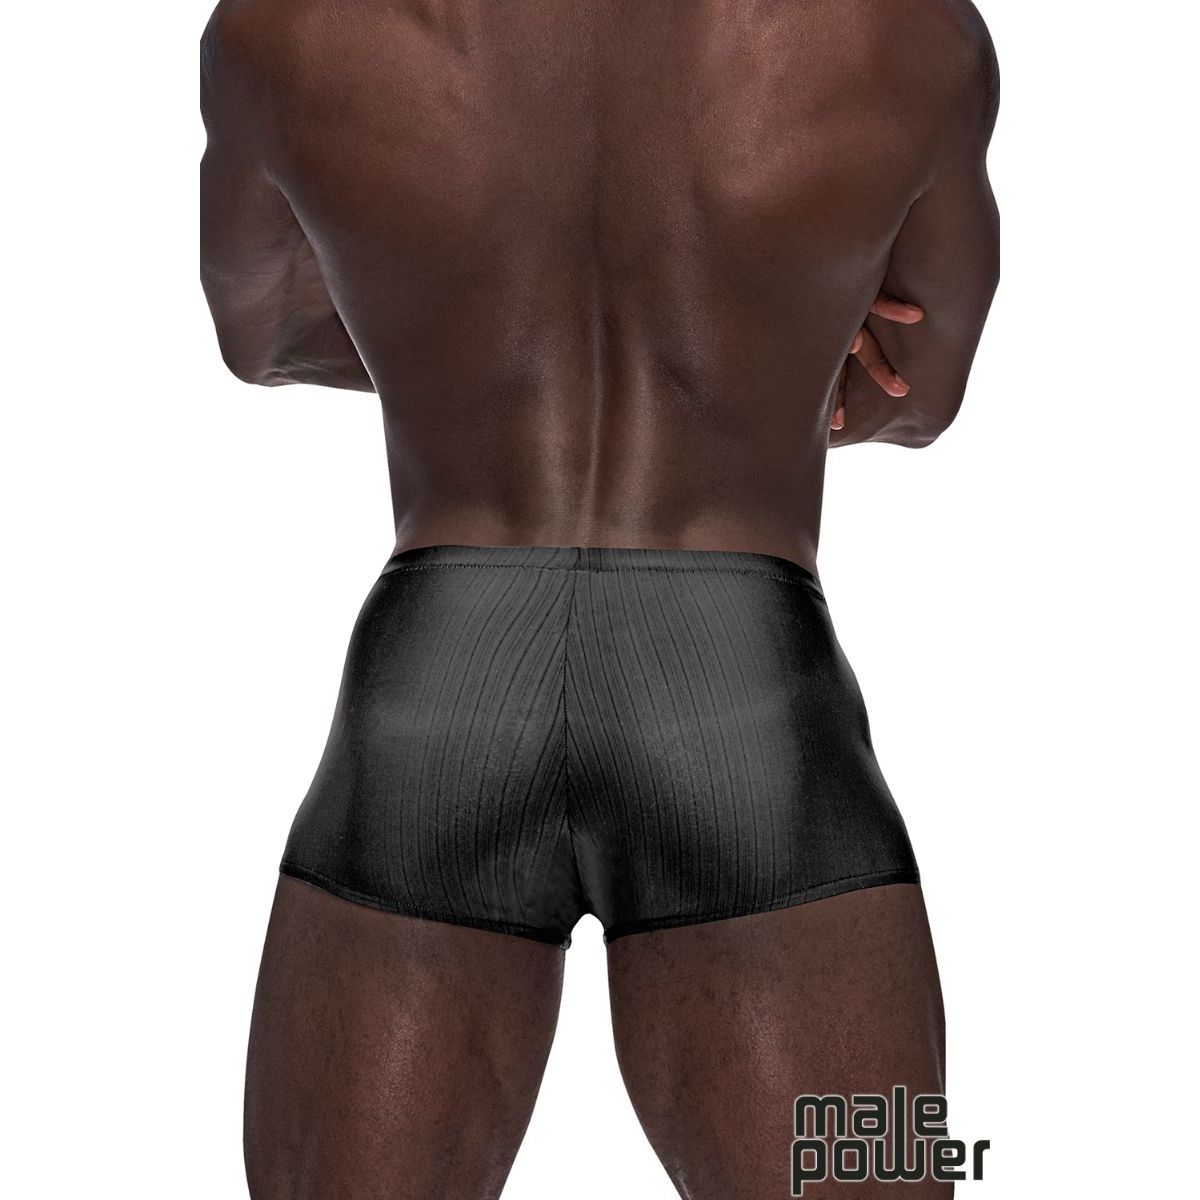 Barely There Shorts for Him by Male Power